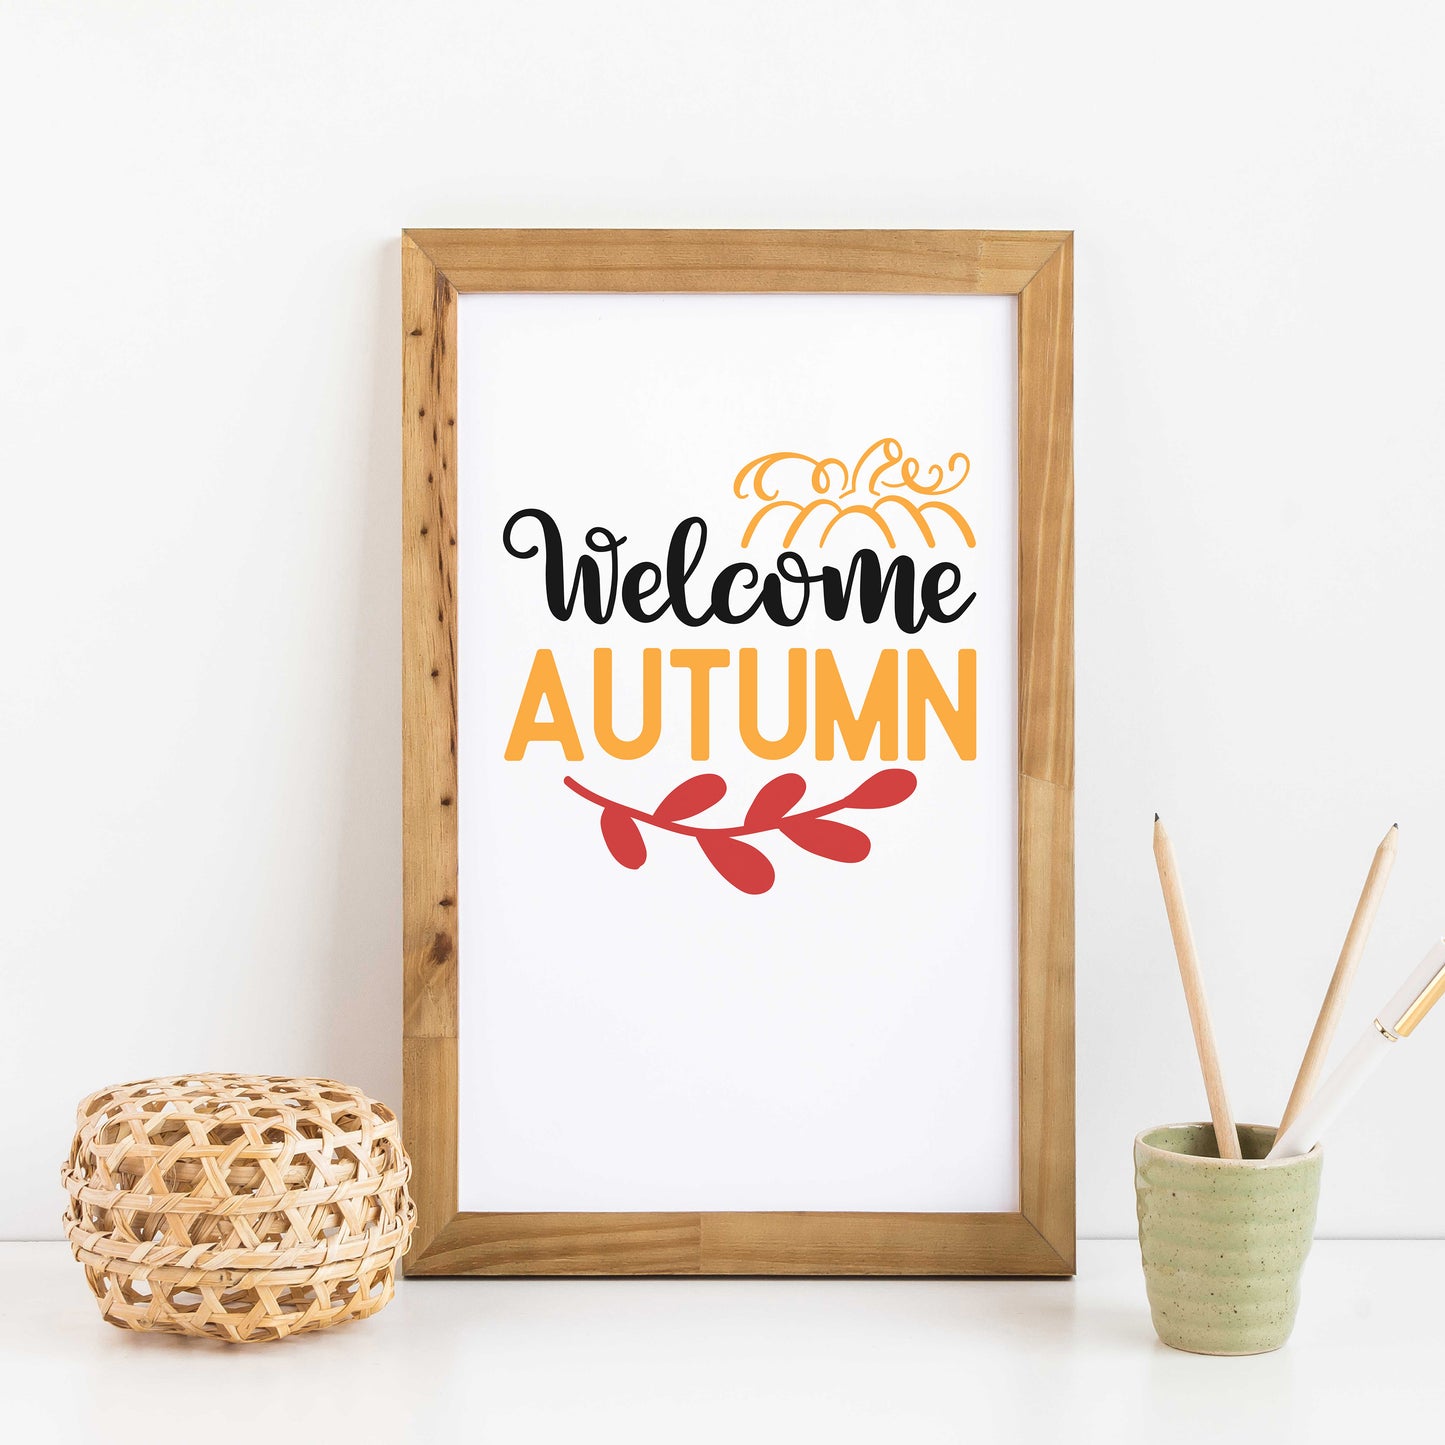 "Welcome Autumn With Pumpkin" Graphic